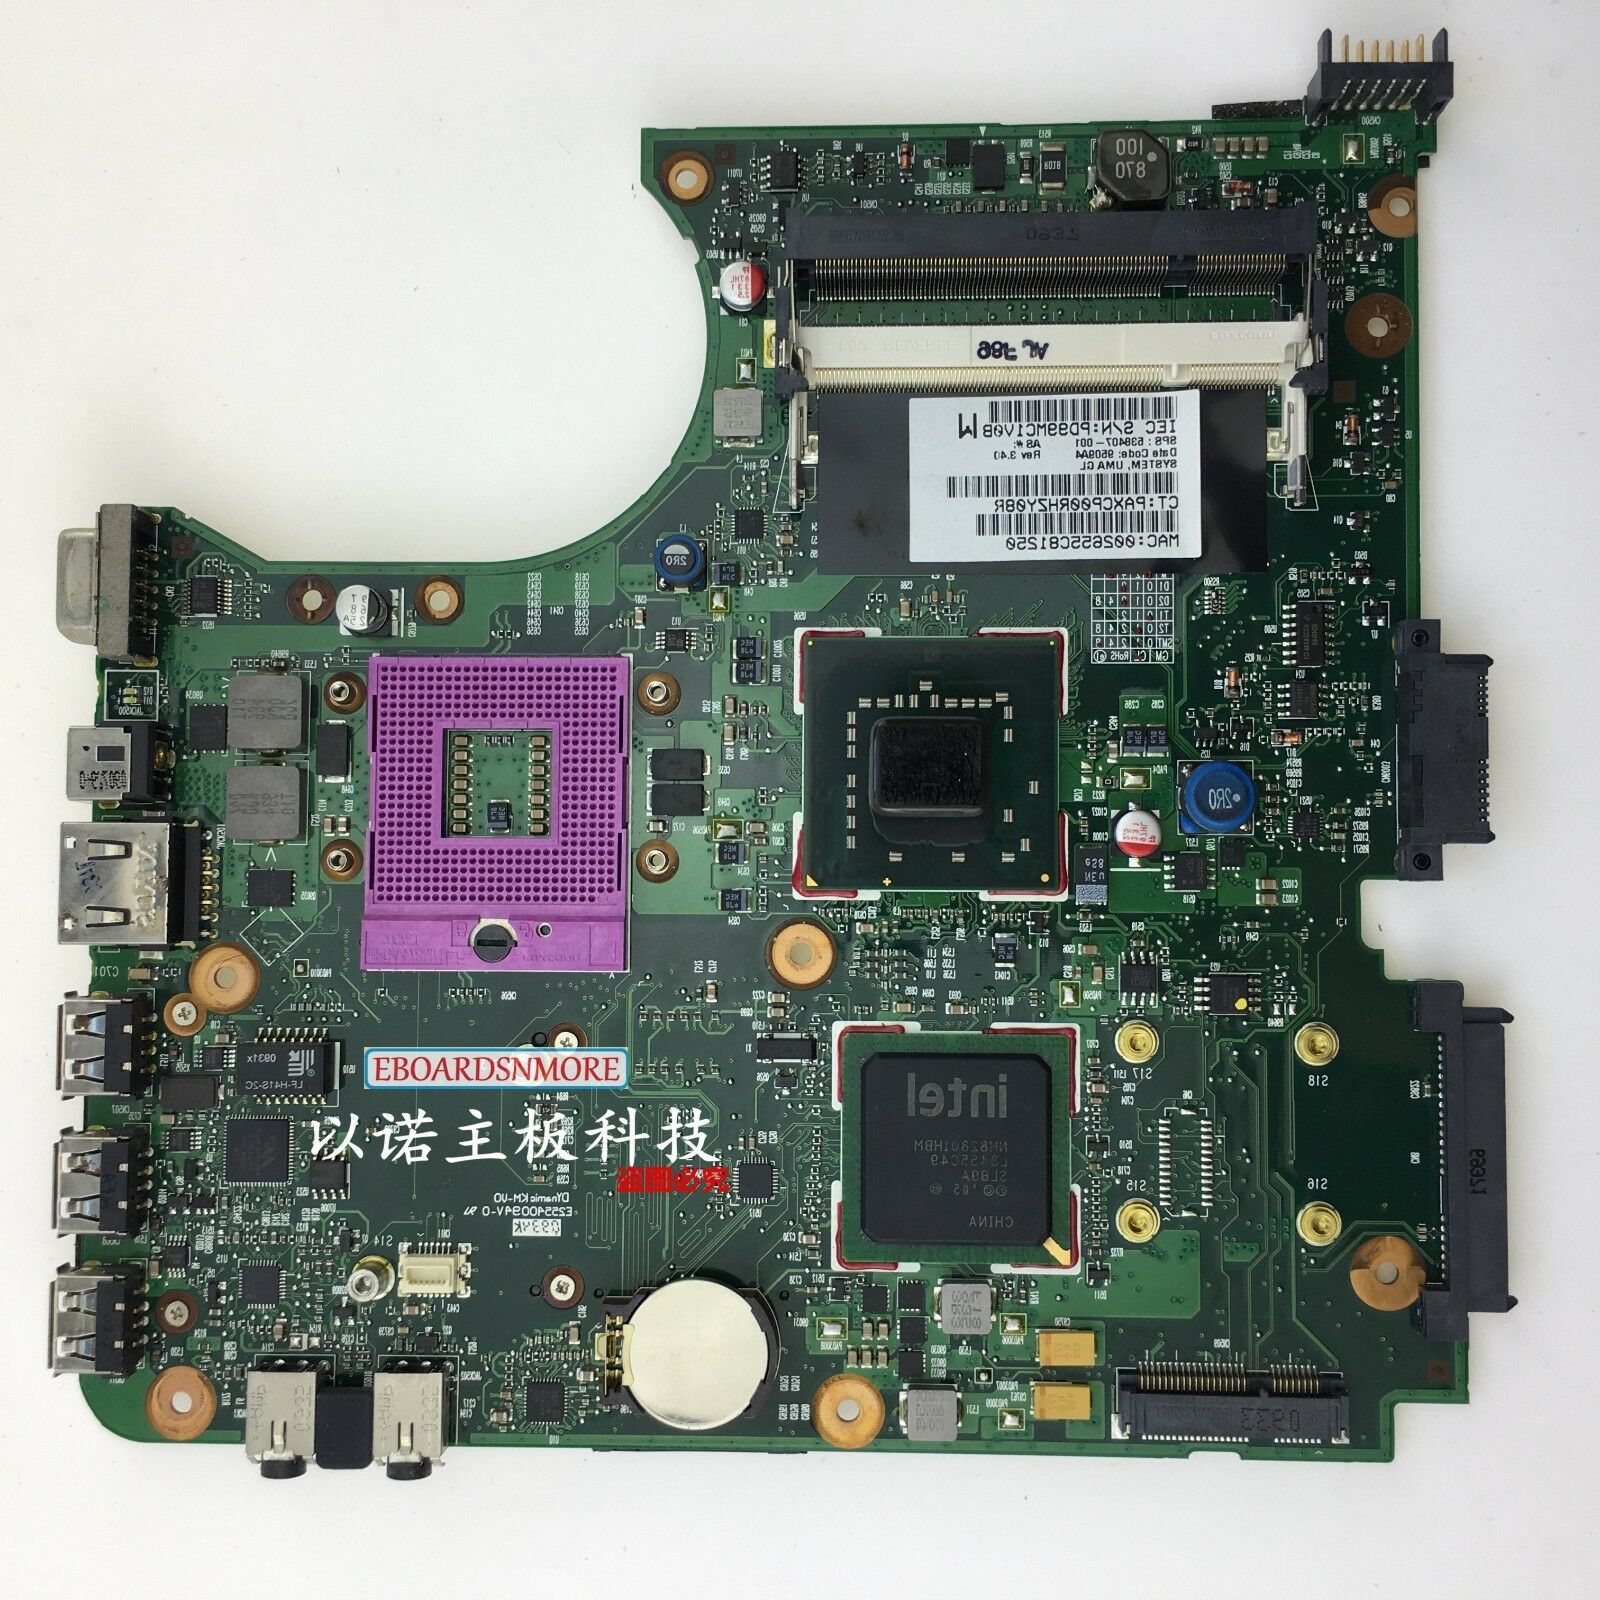 538409-001 Intel GM965 MOTHERBOARD for HP Compaq 510 610 Series LAPTOPS A Compatible CPU Brand: Intel Memory